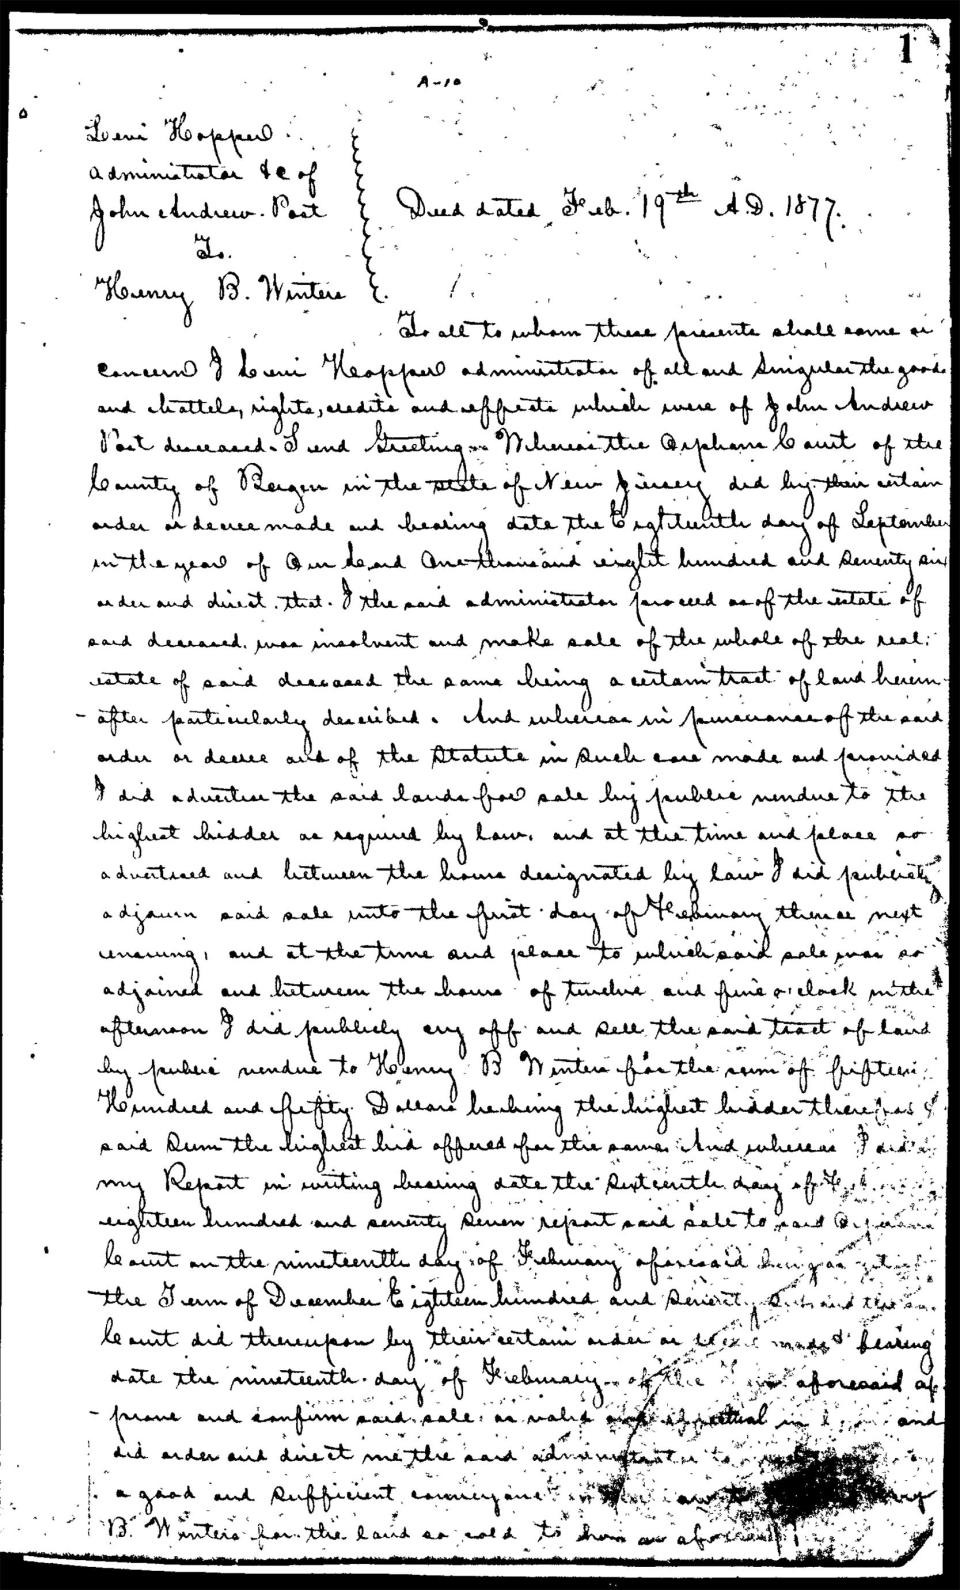 A scanned copy of a deed from 1877.